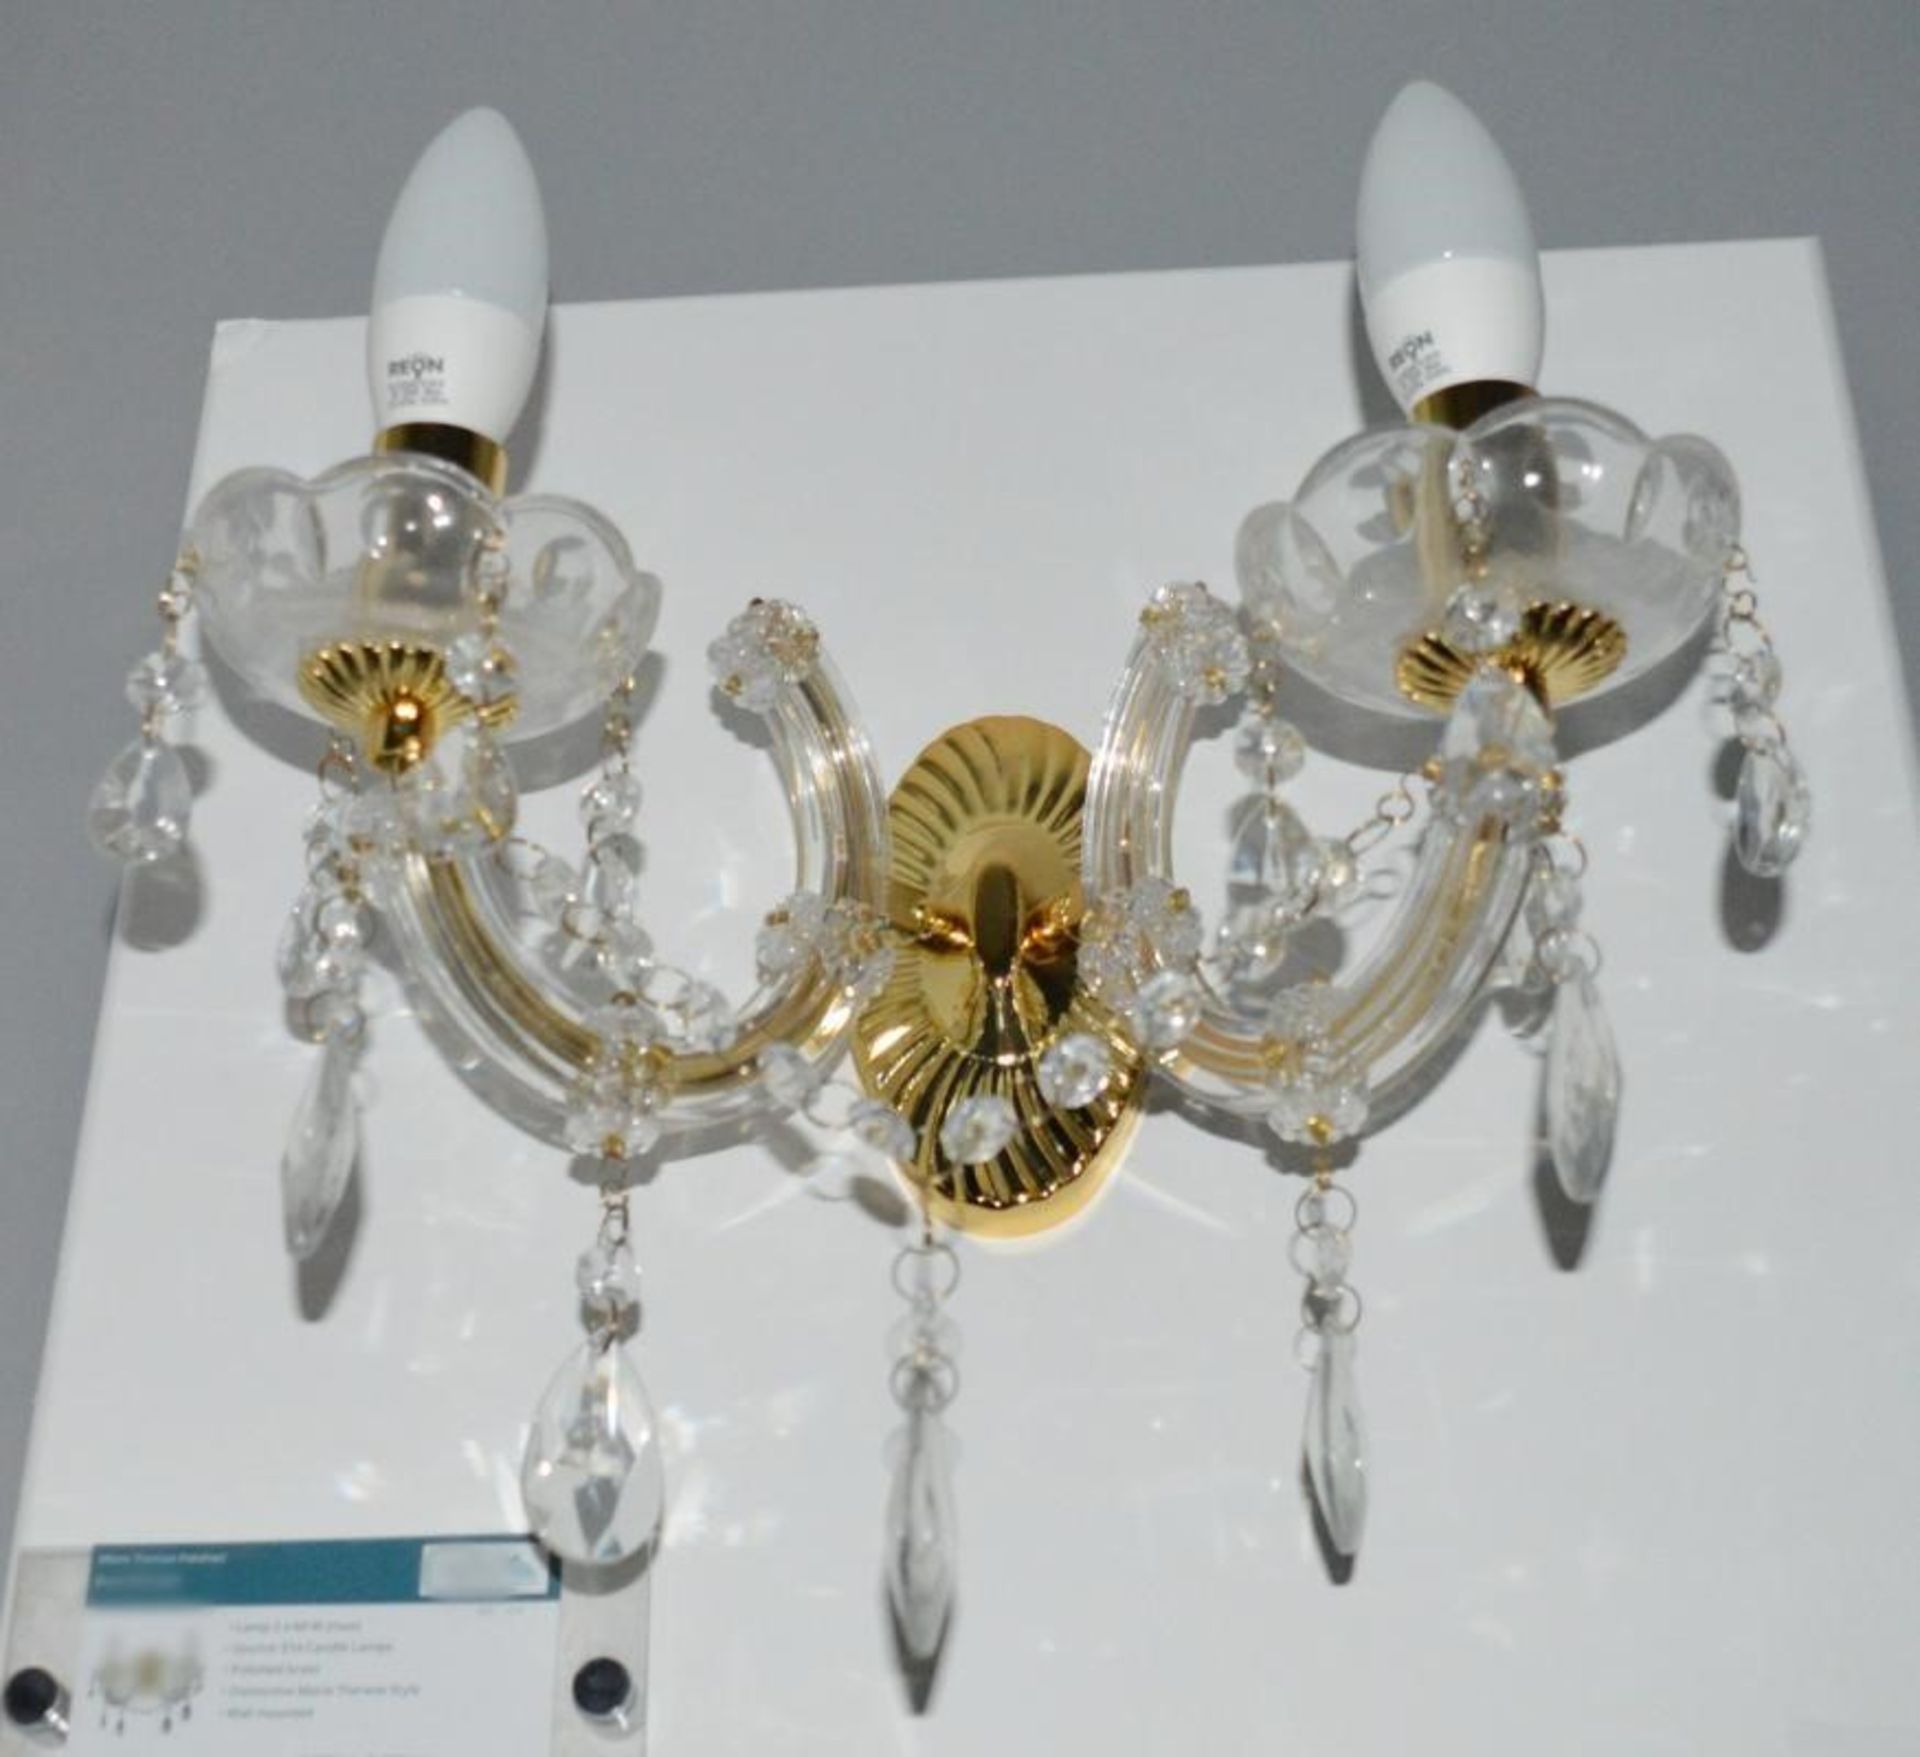 1 x Marie Therese Polished Brass 2 Light Wall Sconce With Crystal Drops - Ex Display Stock - CL298 - - Image 2 of 3